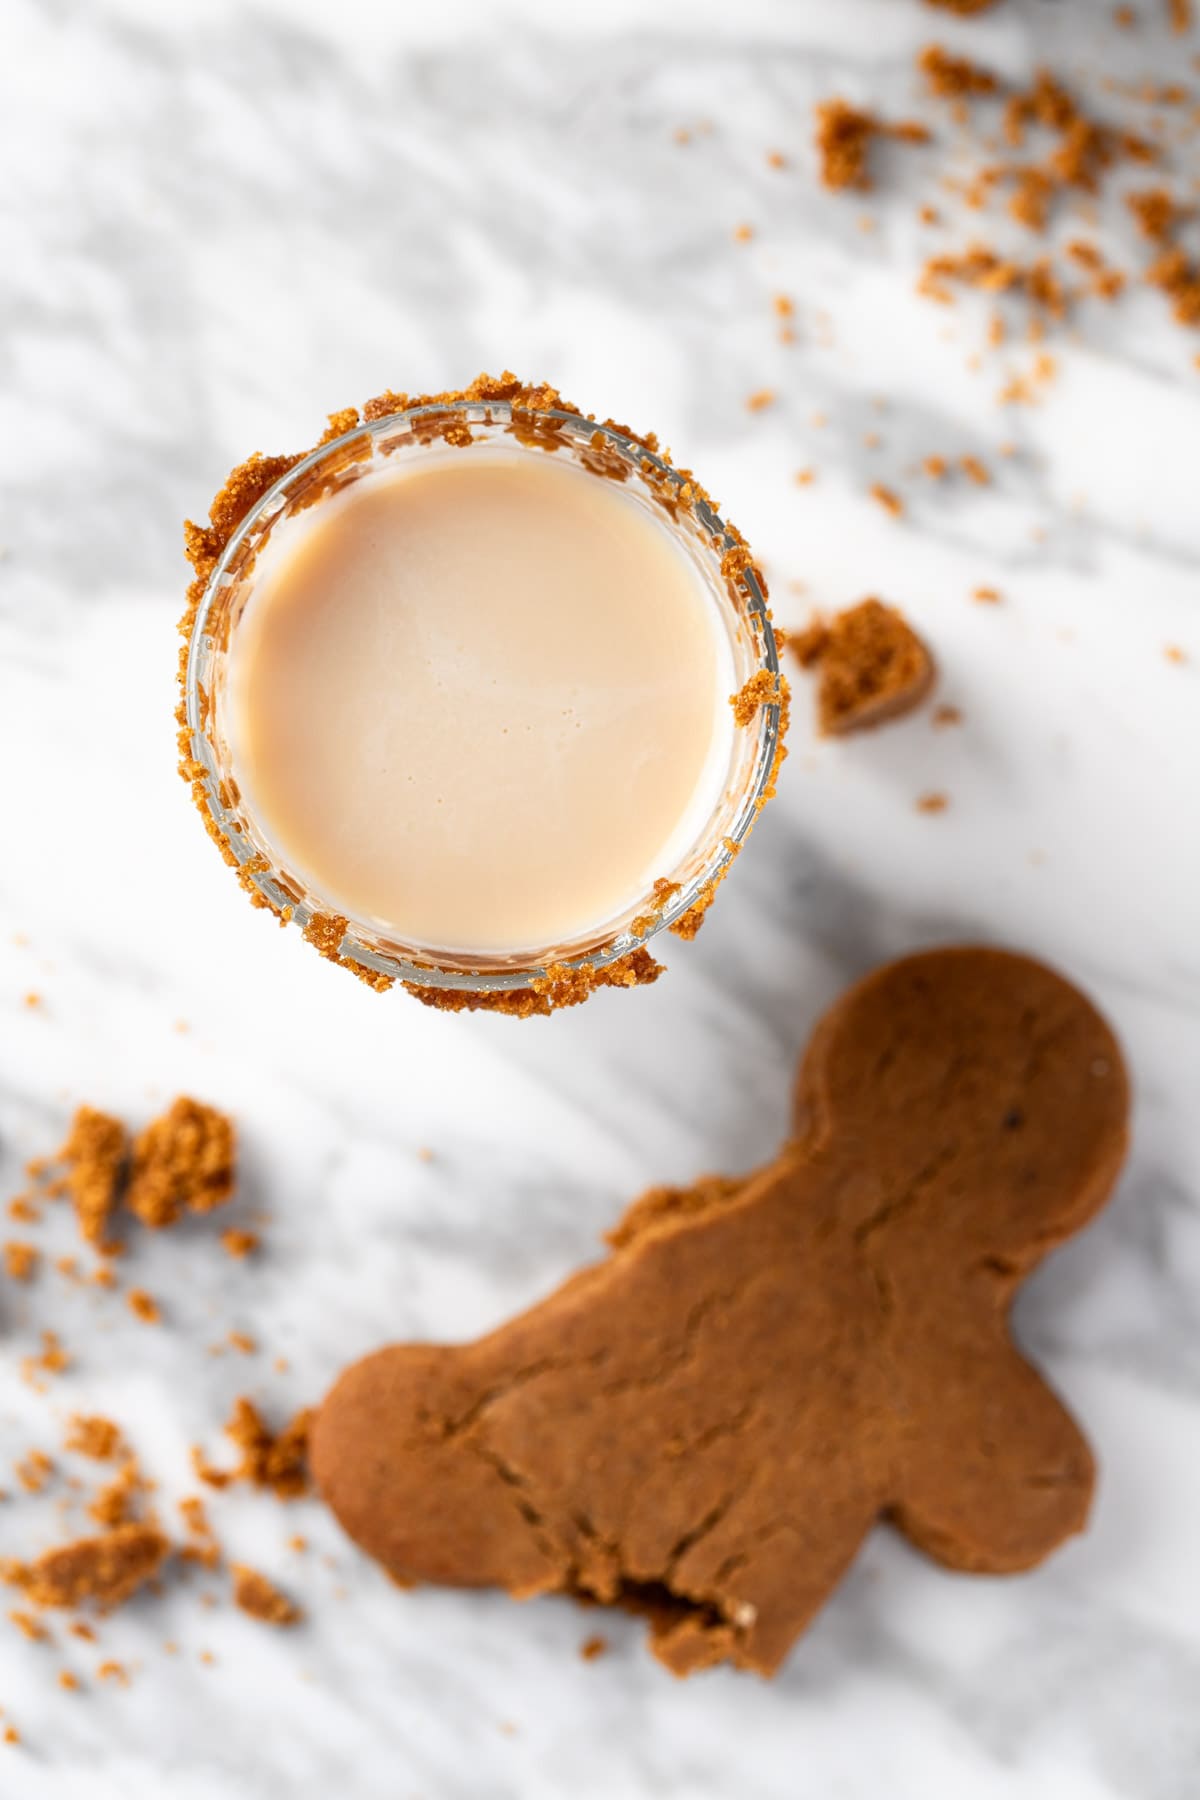 A gingerbread man shot on a white table next to half a gingerbread man cookie.